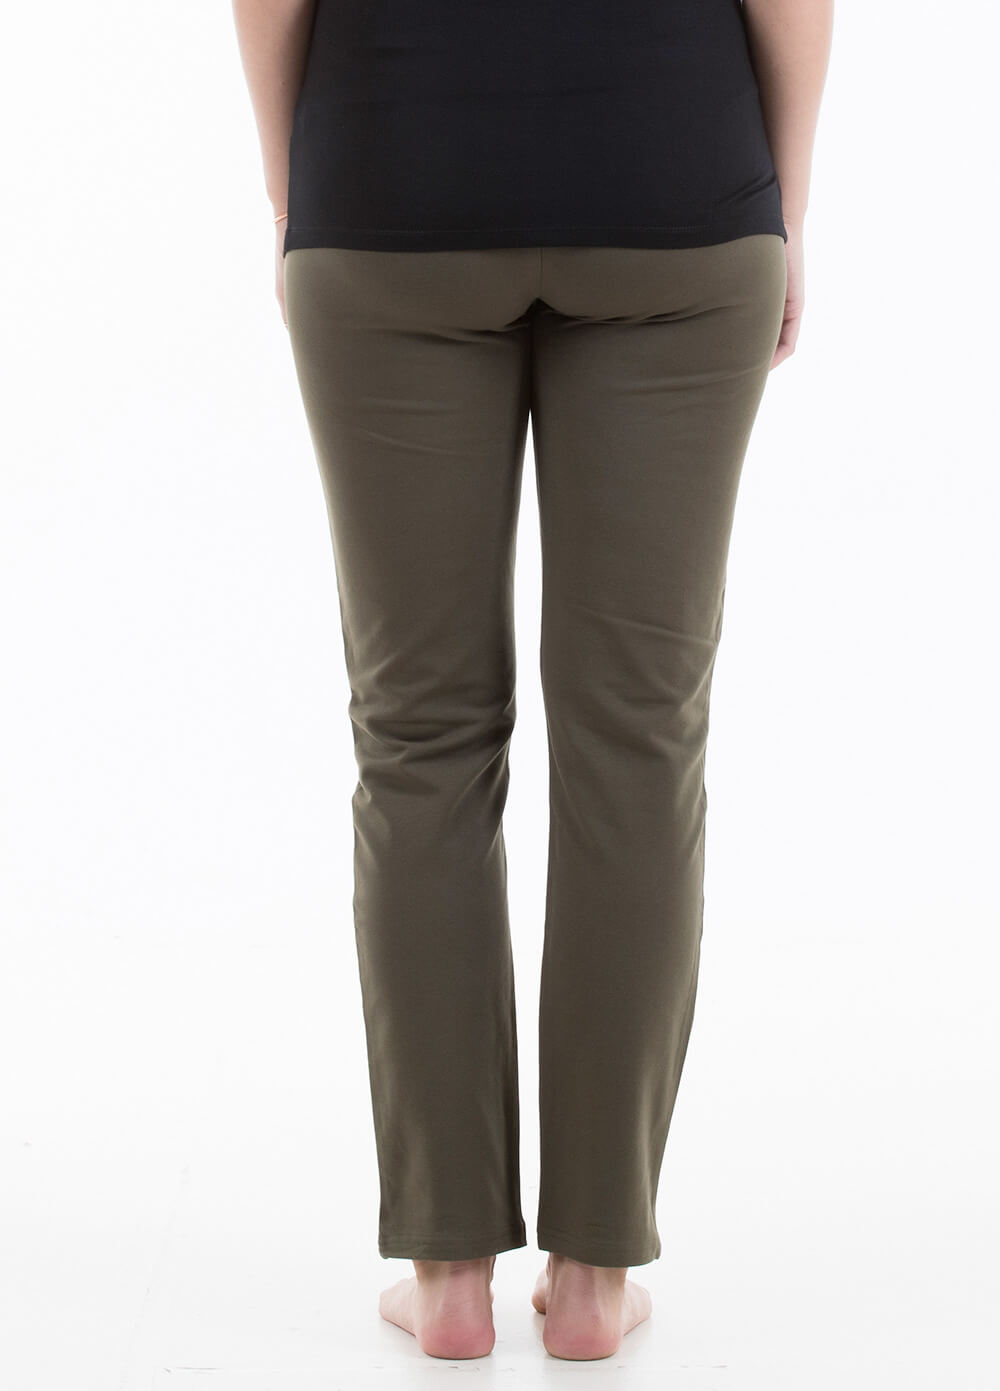 Archer French Terry Maternity Pants in Olive by Trimester